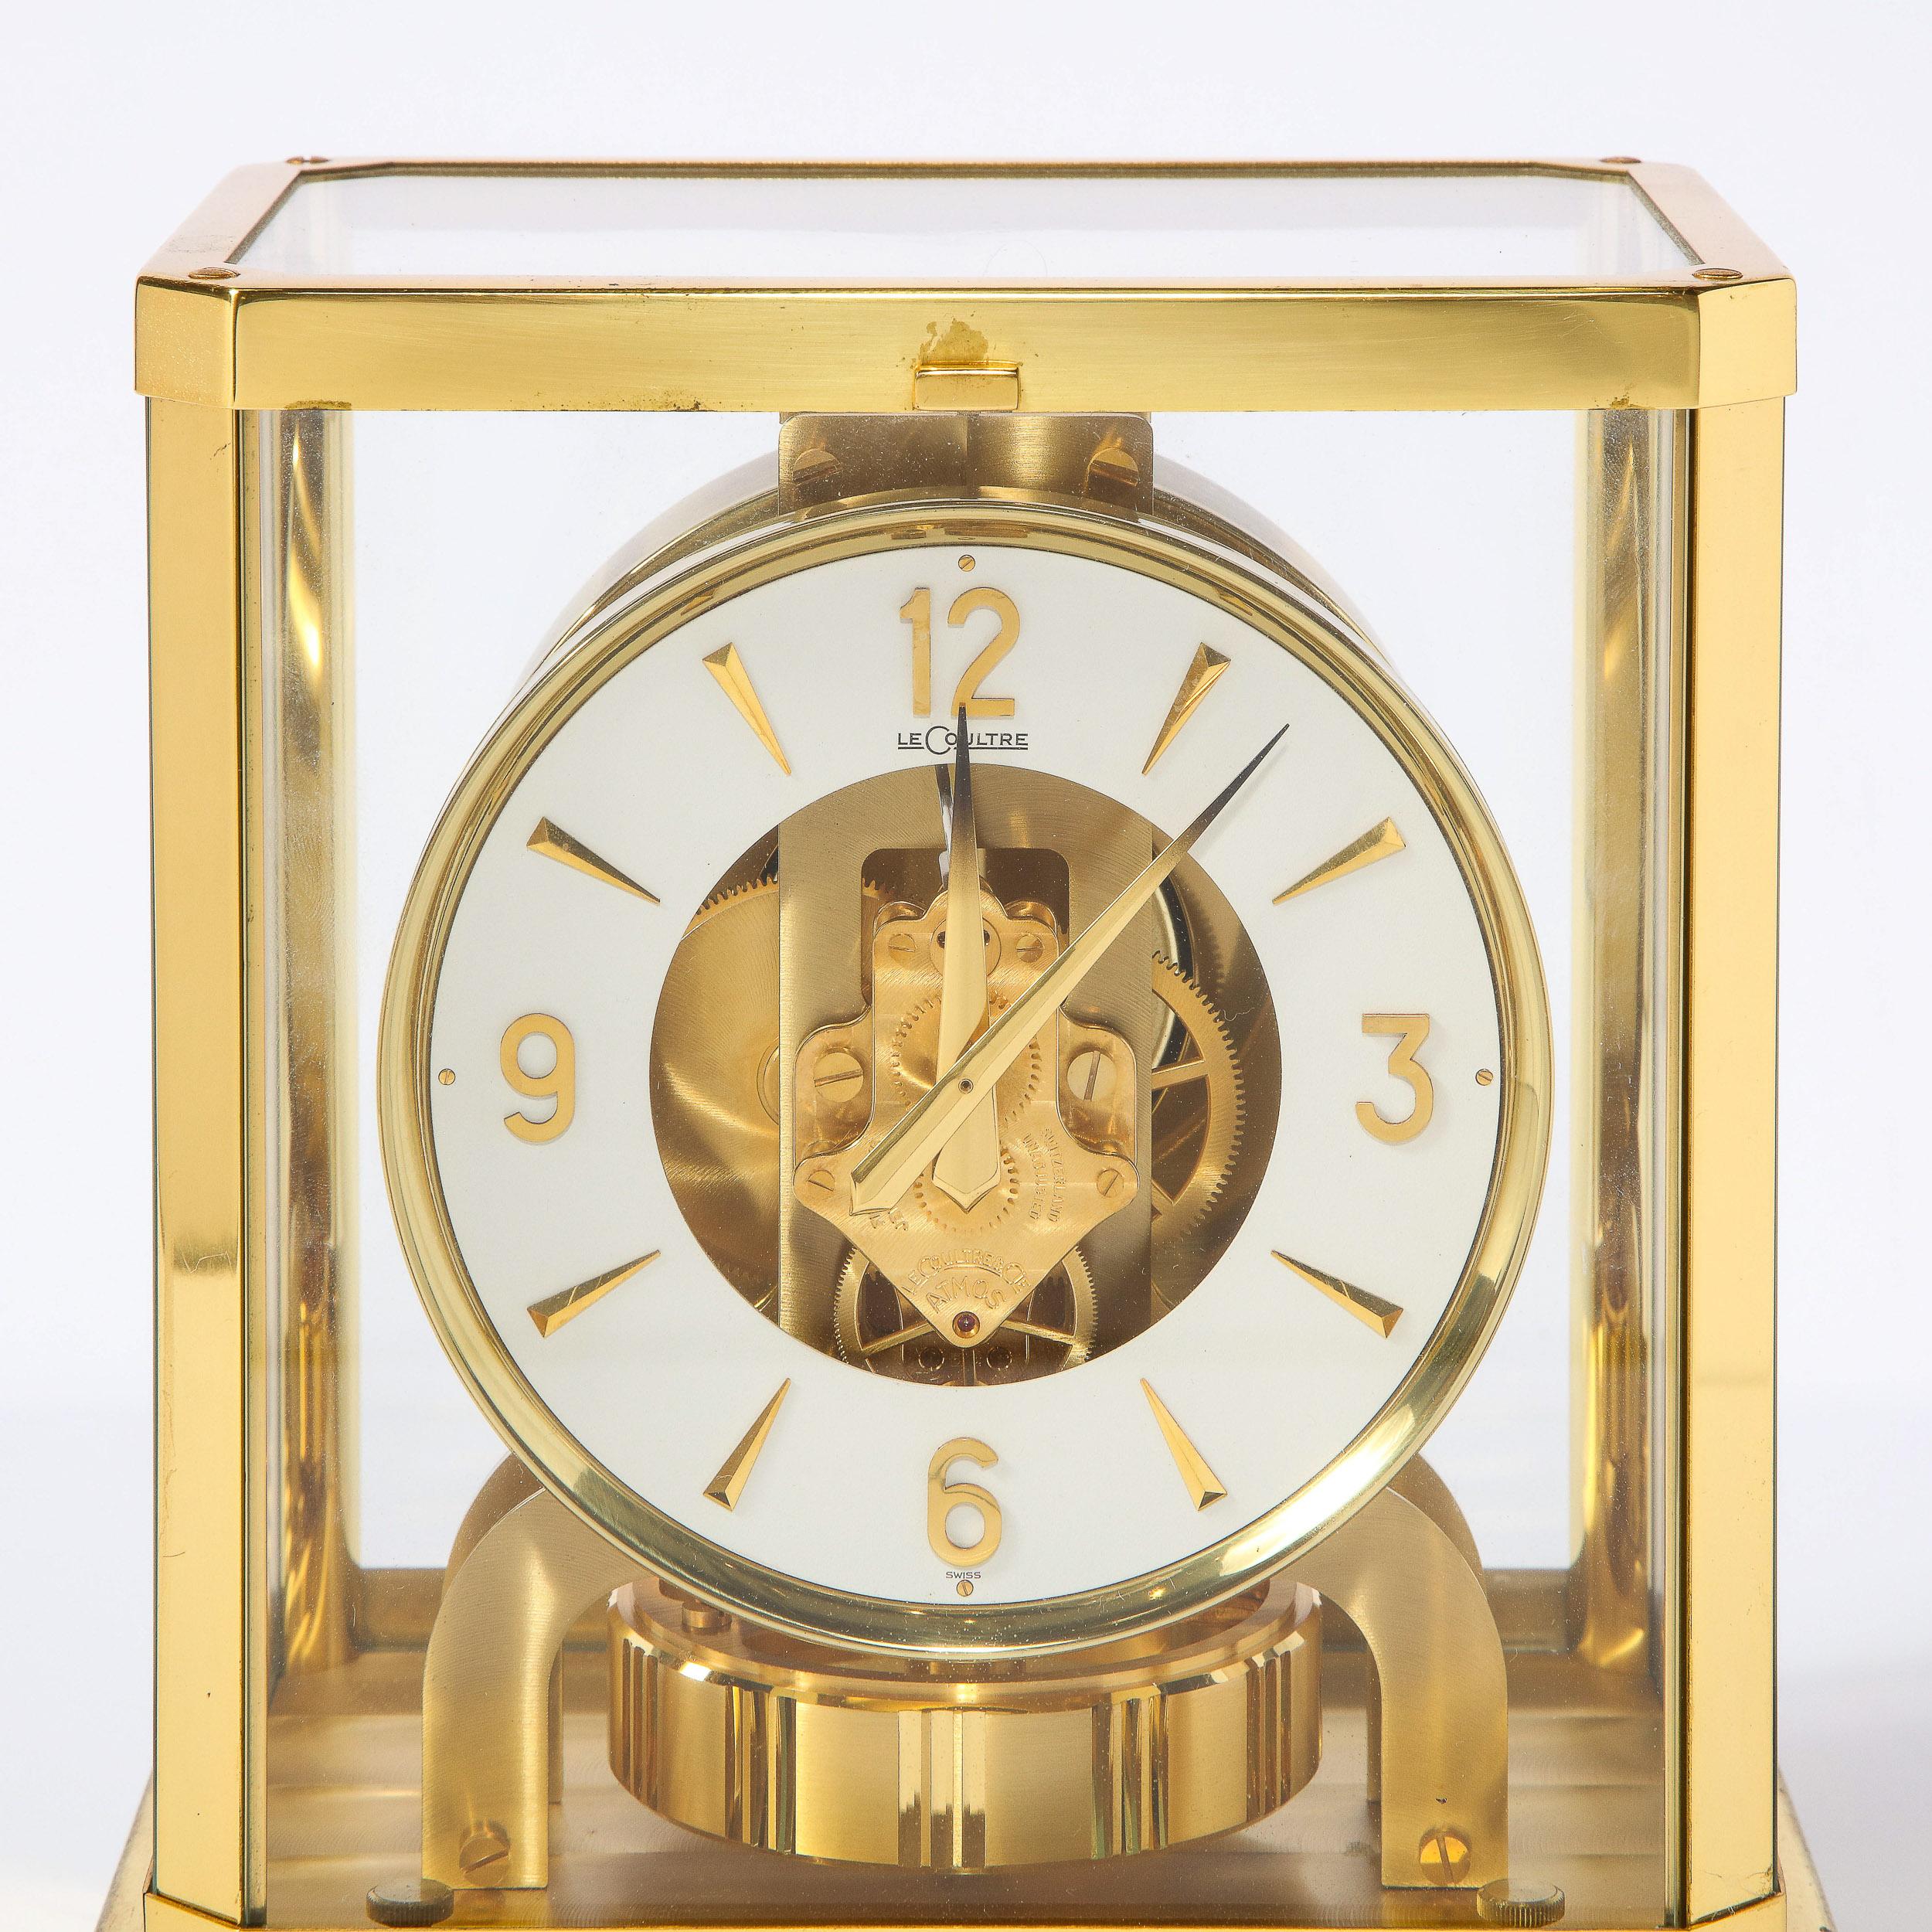 Swiss Modernist Polished Brass Atmos Classique Desk Clock by Jaeger-LeCoultre